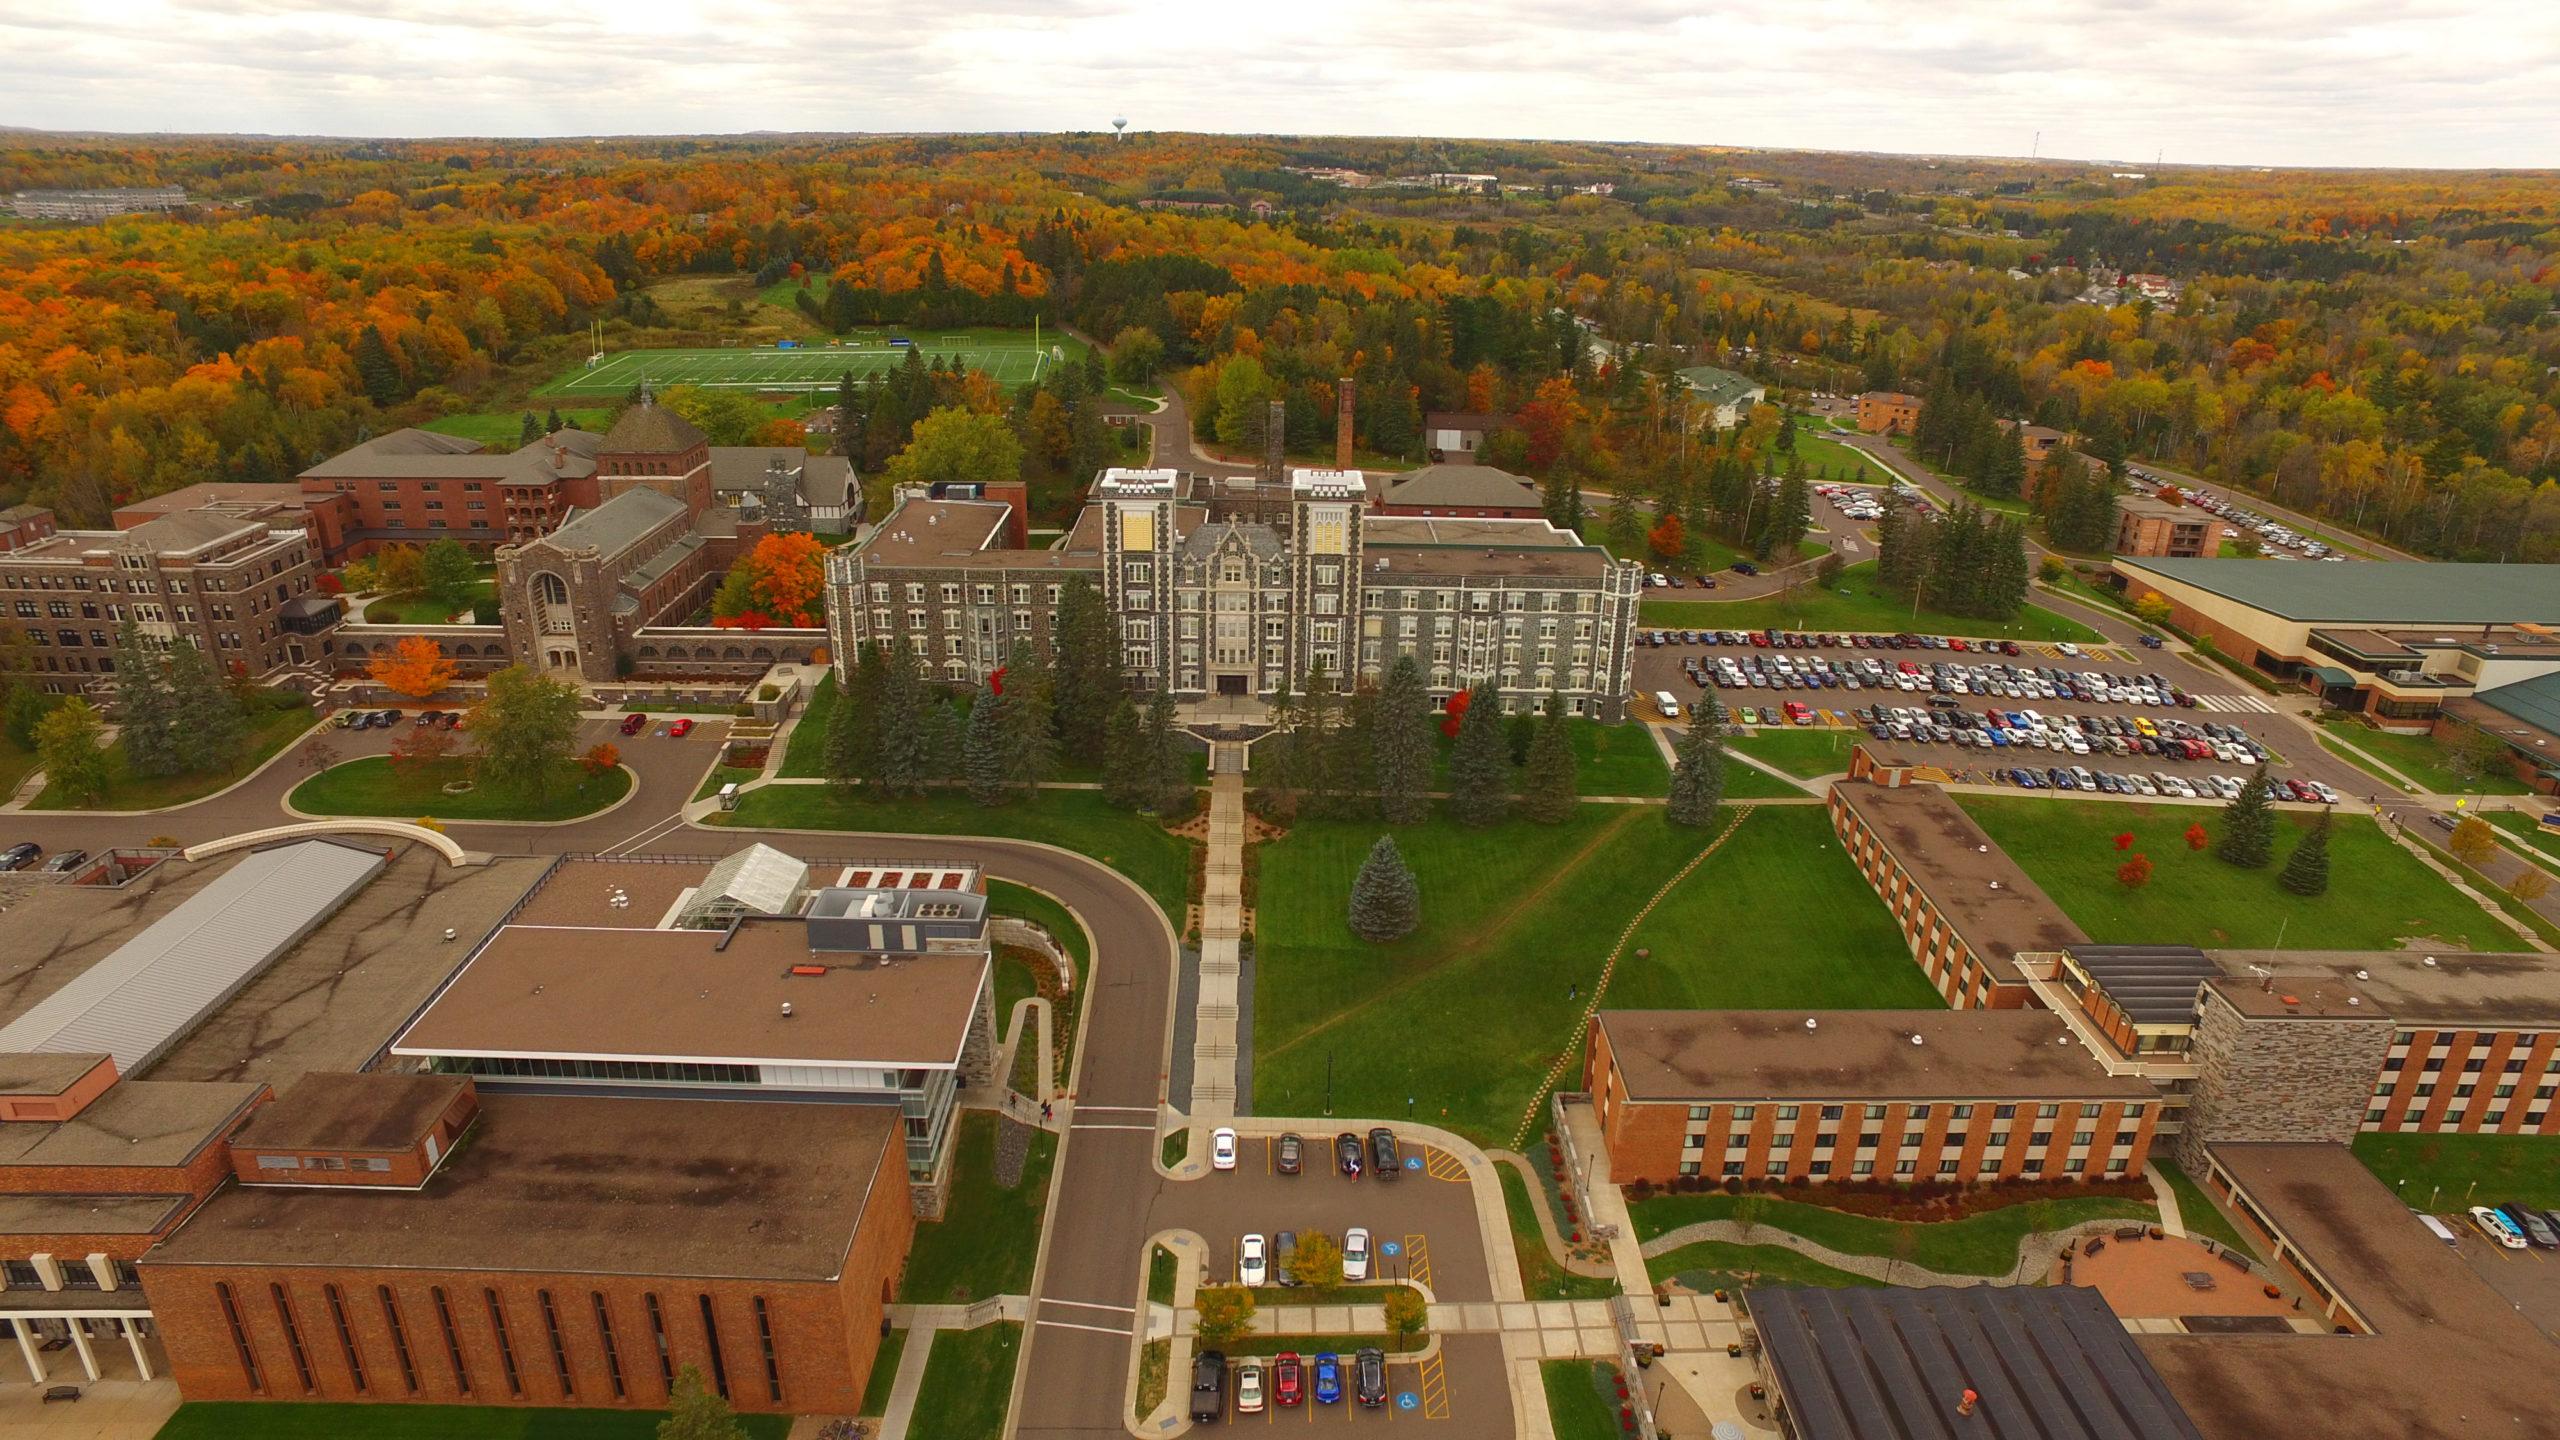 The College of St. Scholastica - Profile, Rankings and Data